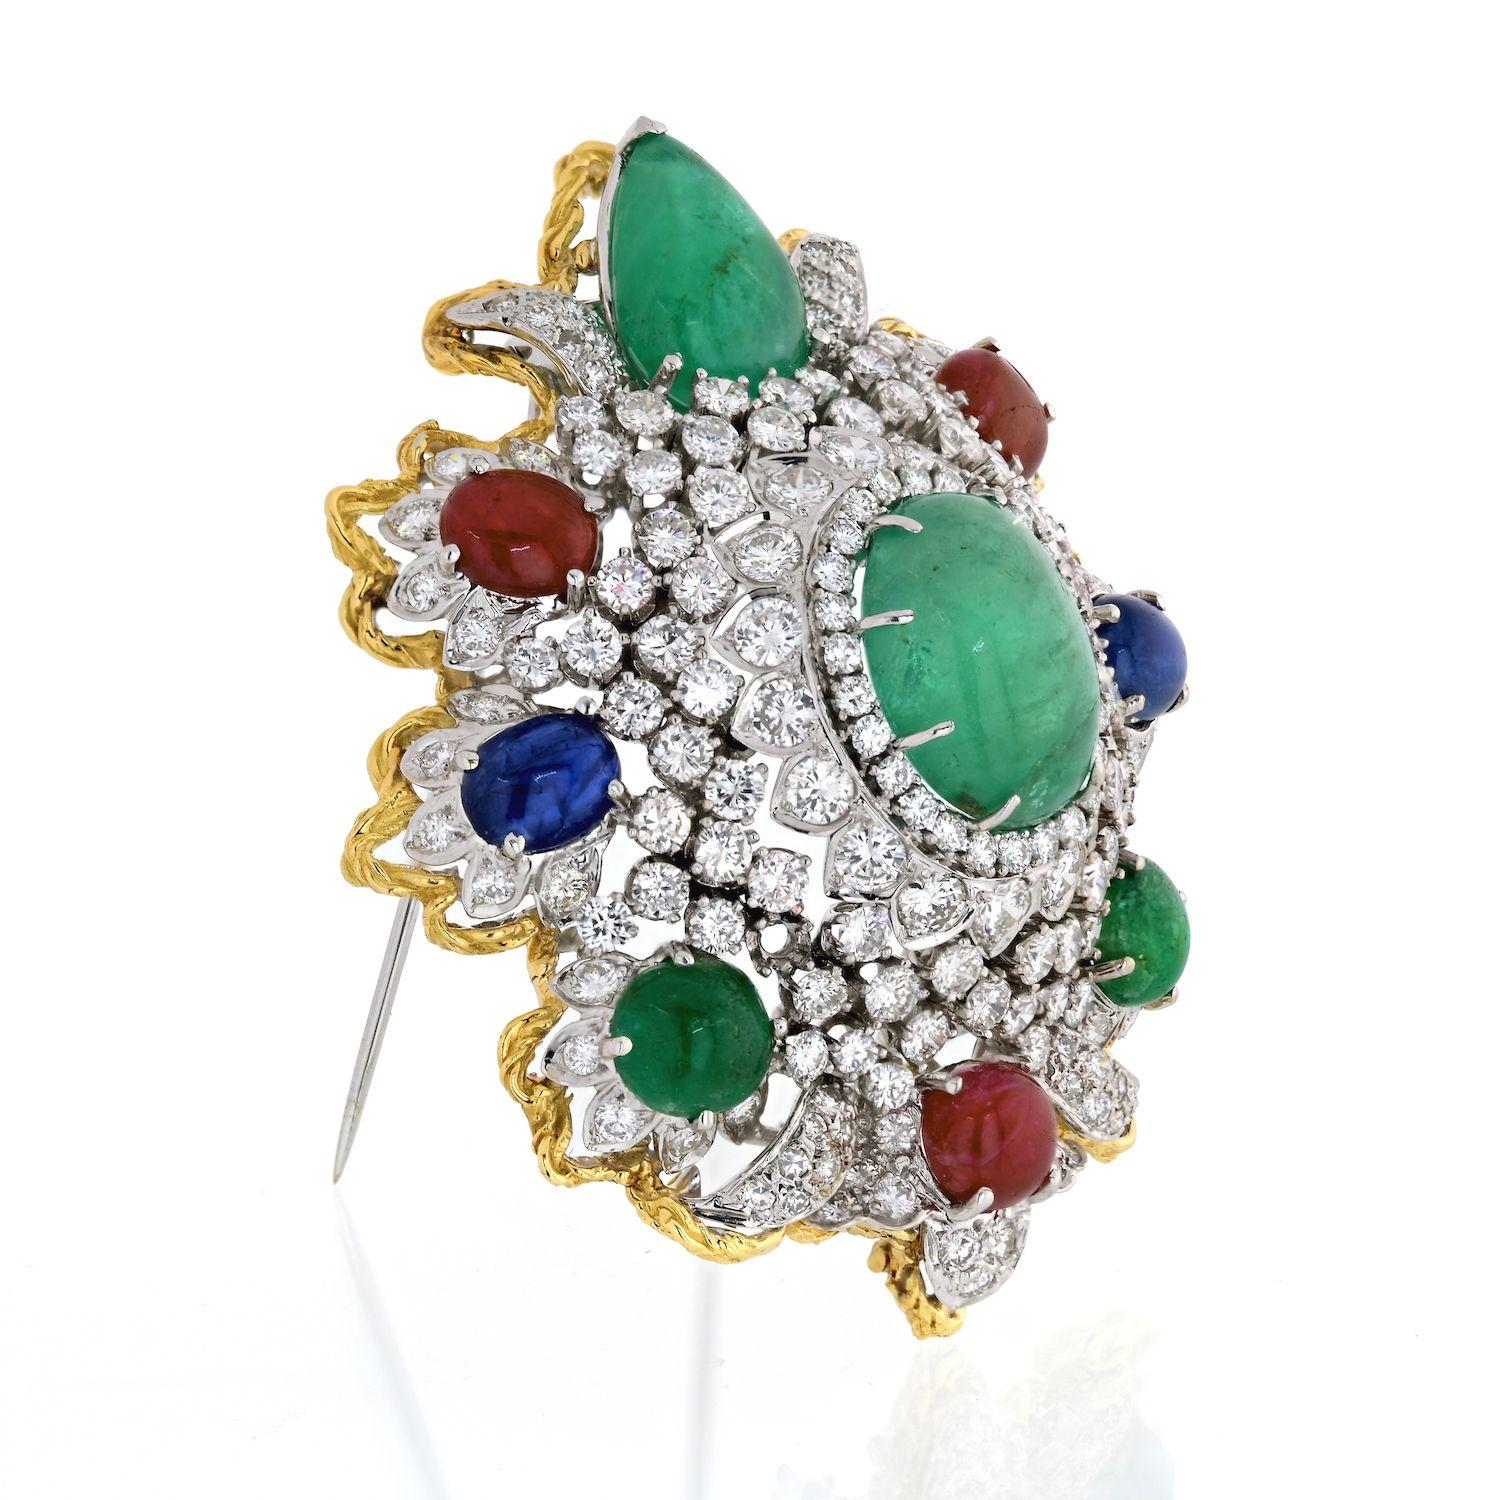 An impressive diamond and gemstone Heraldic Brooch from 1970's. Can also be worn as a pendant. 

Set with cabochon emeralds, rubies, and sapphires, brilliant-cut diamonds, 18K gold, and platinum.
Approx. diamond weight: 12.00cttw 
Diamond Quality: